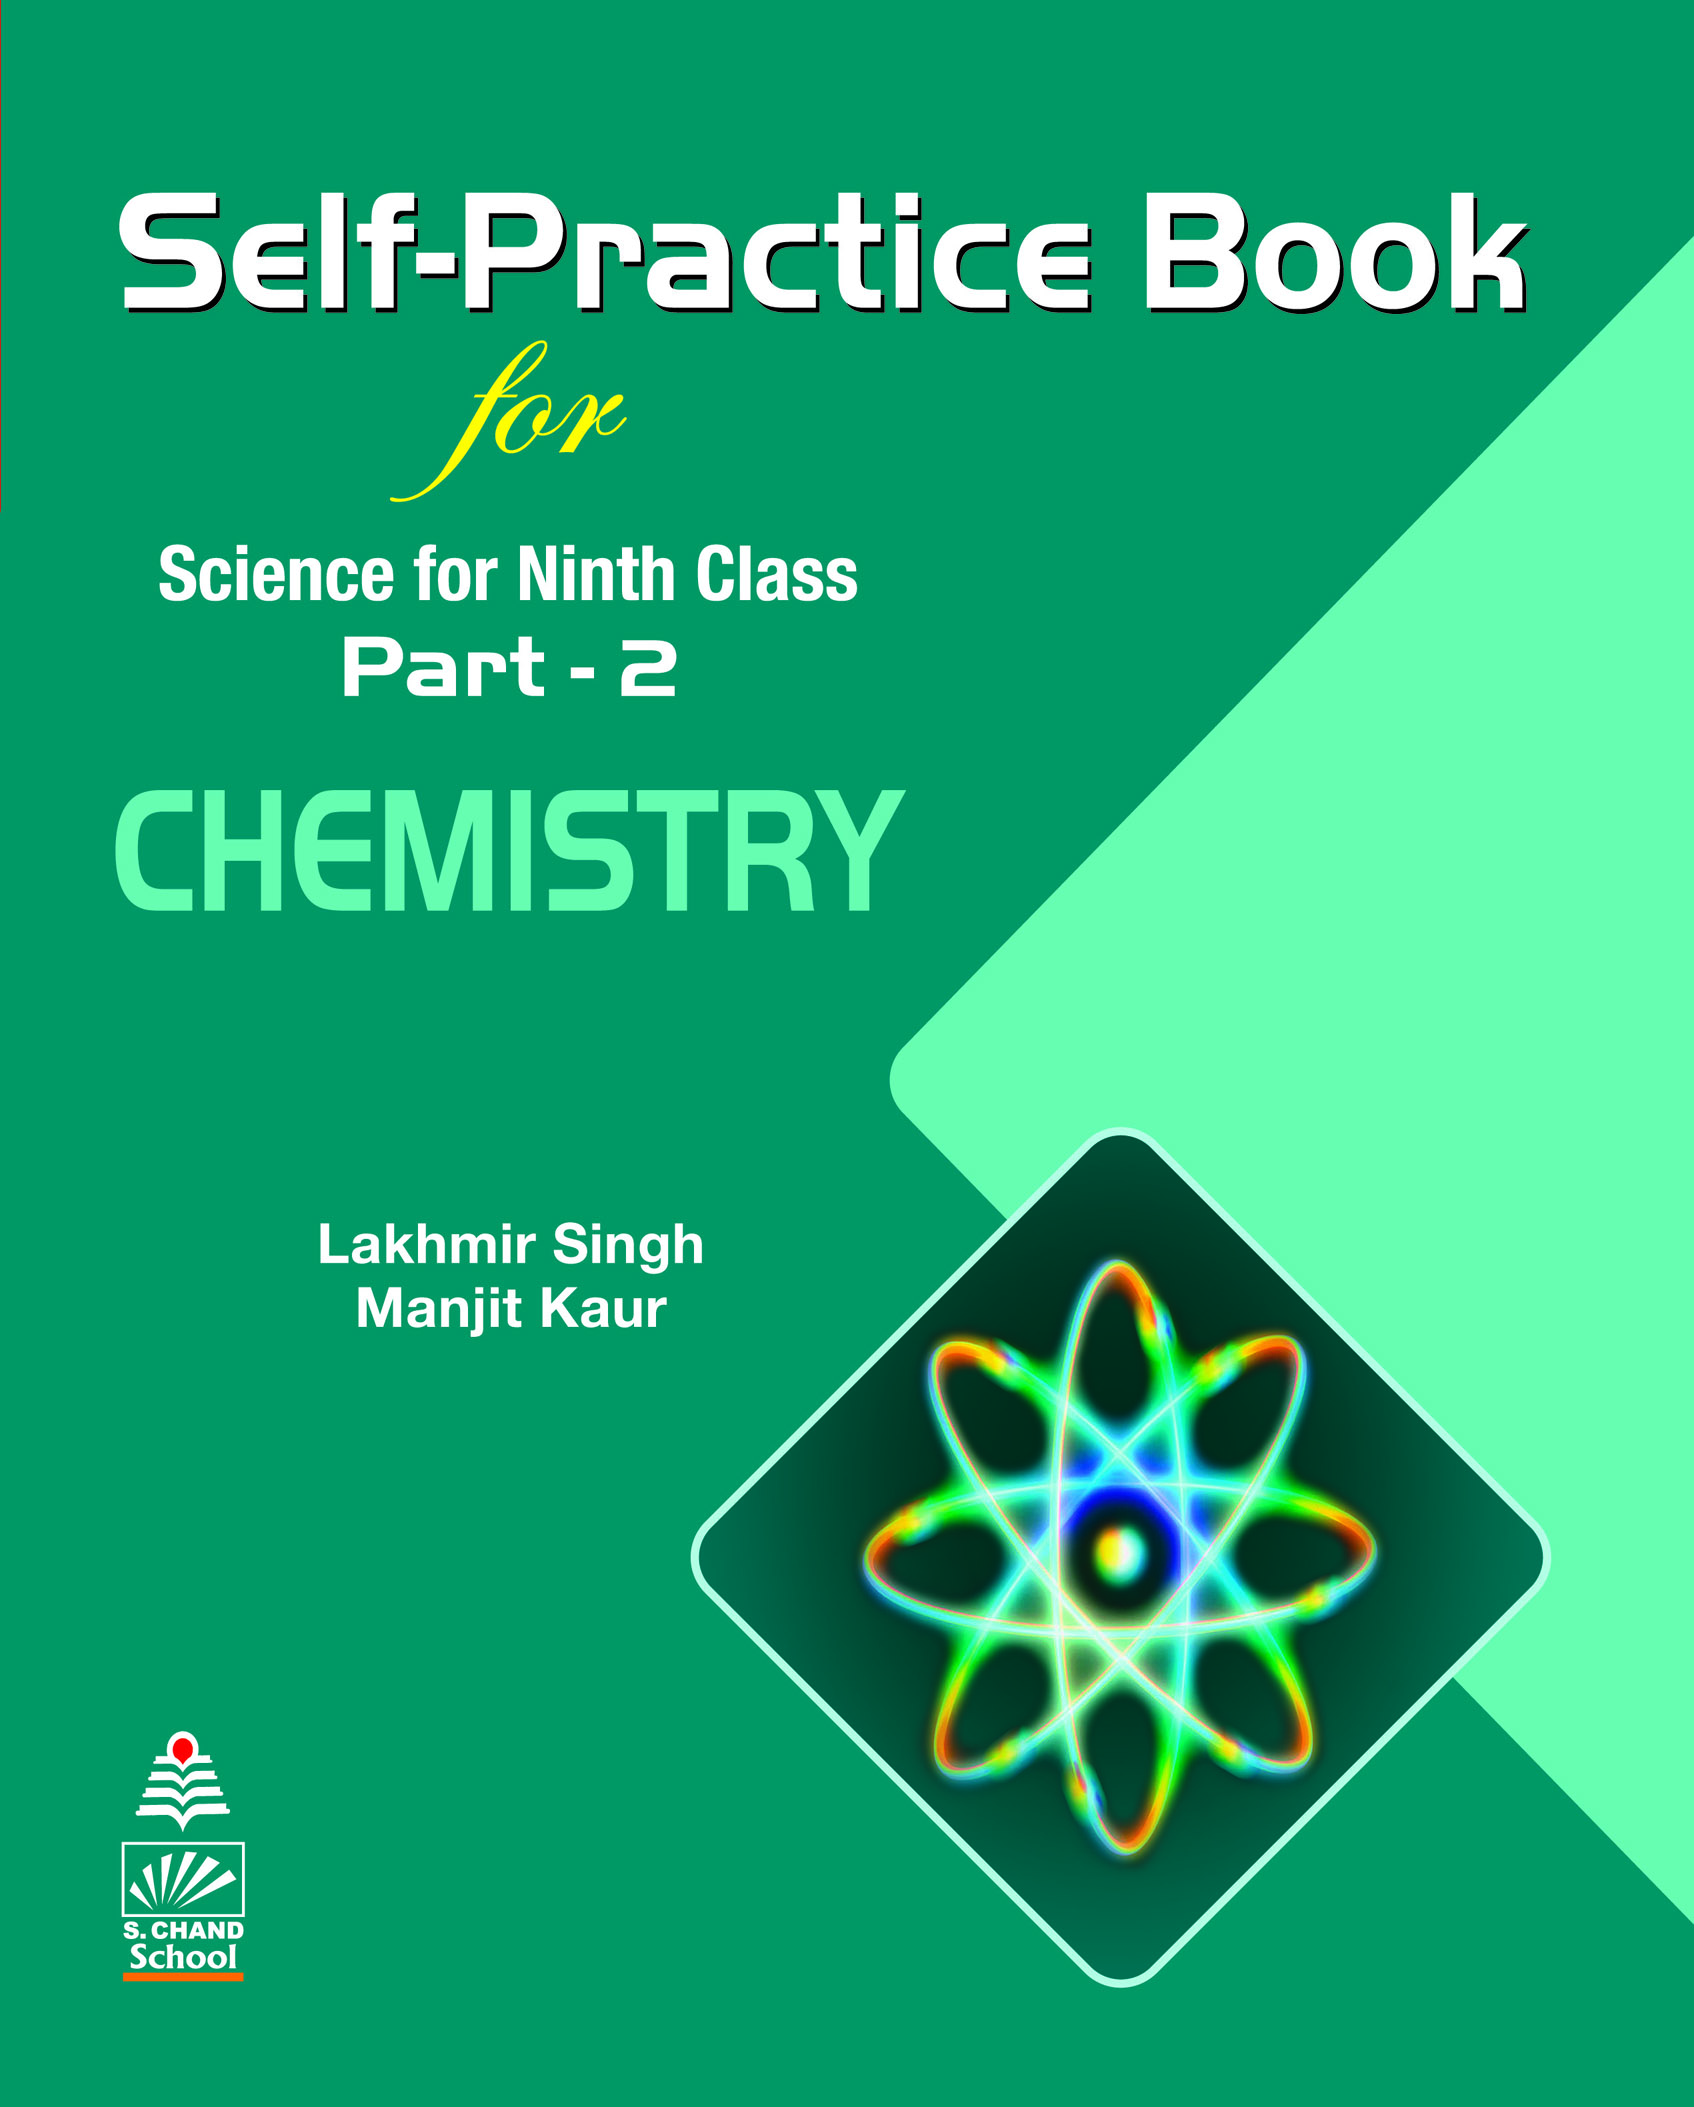 Self-Practice Book Science for Ninth Class for Part - 2 CHEMISTRY